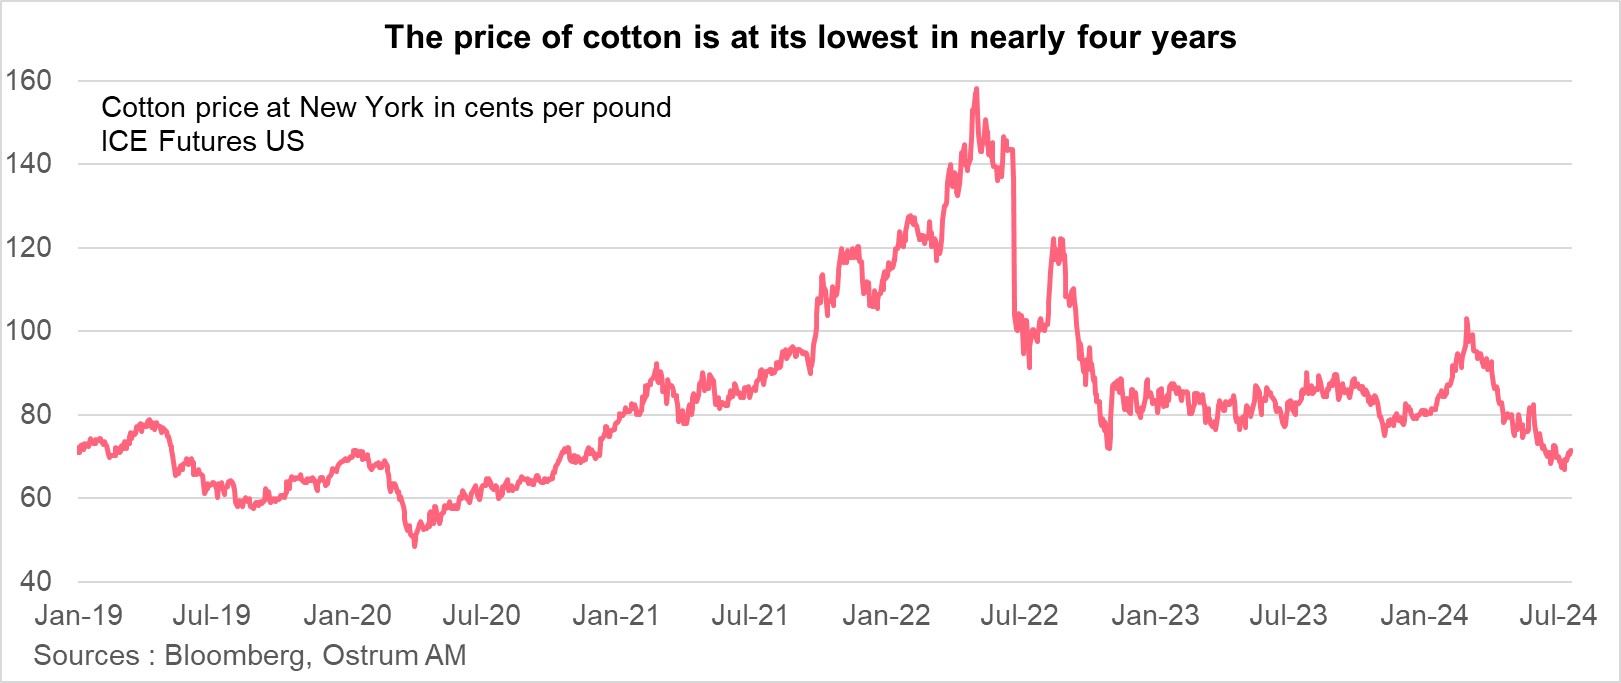 the-price-of-cotton-is-at-its-lowest-in-nearly-four-years.jpg